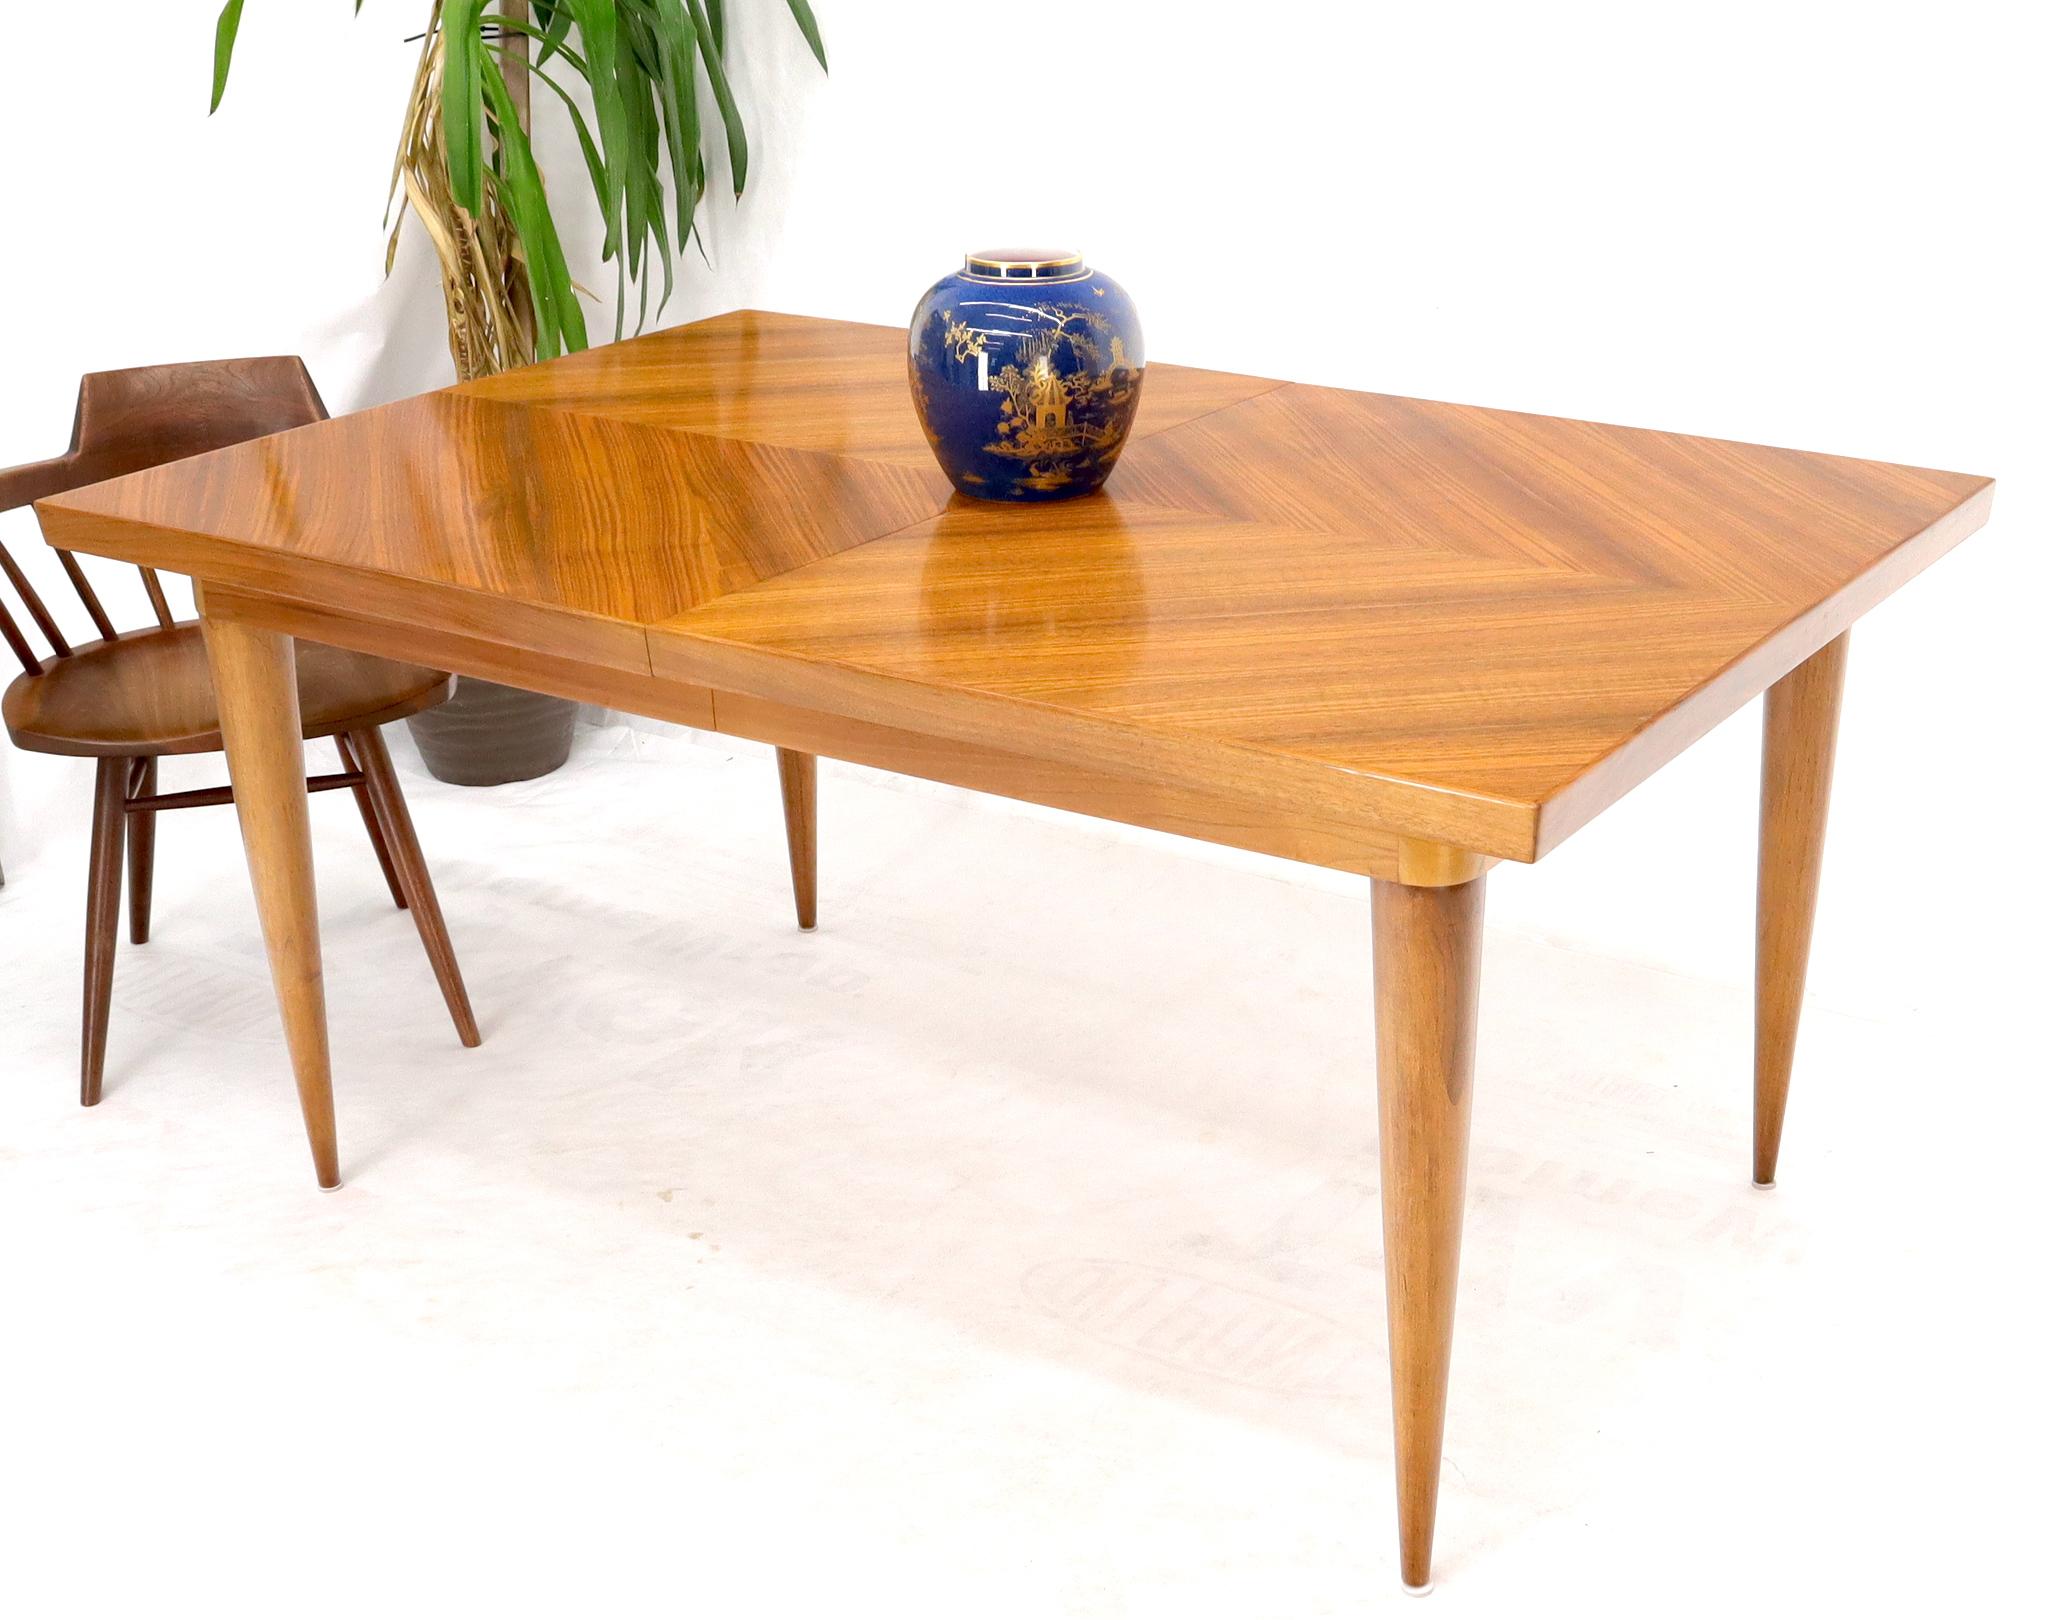 20th Century Large Mid-Century Modern Rectangle Dining Table with 3 Leaves by Erno Fabry